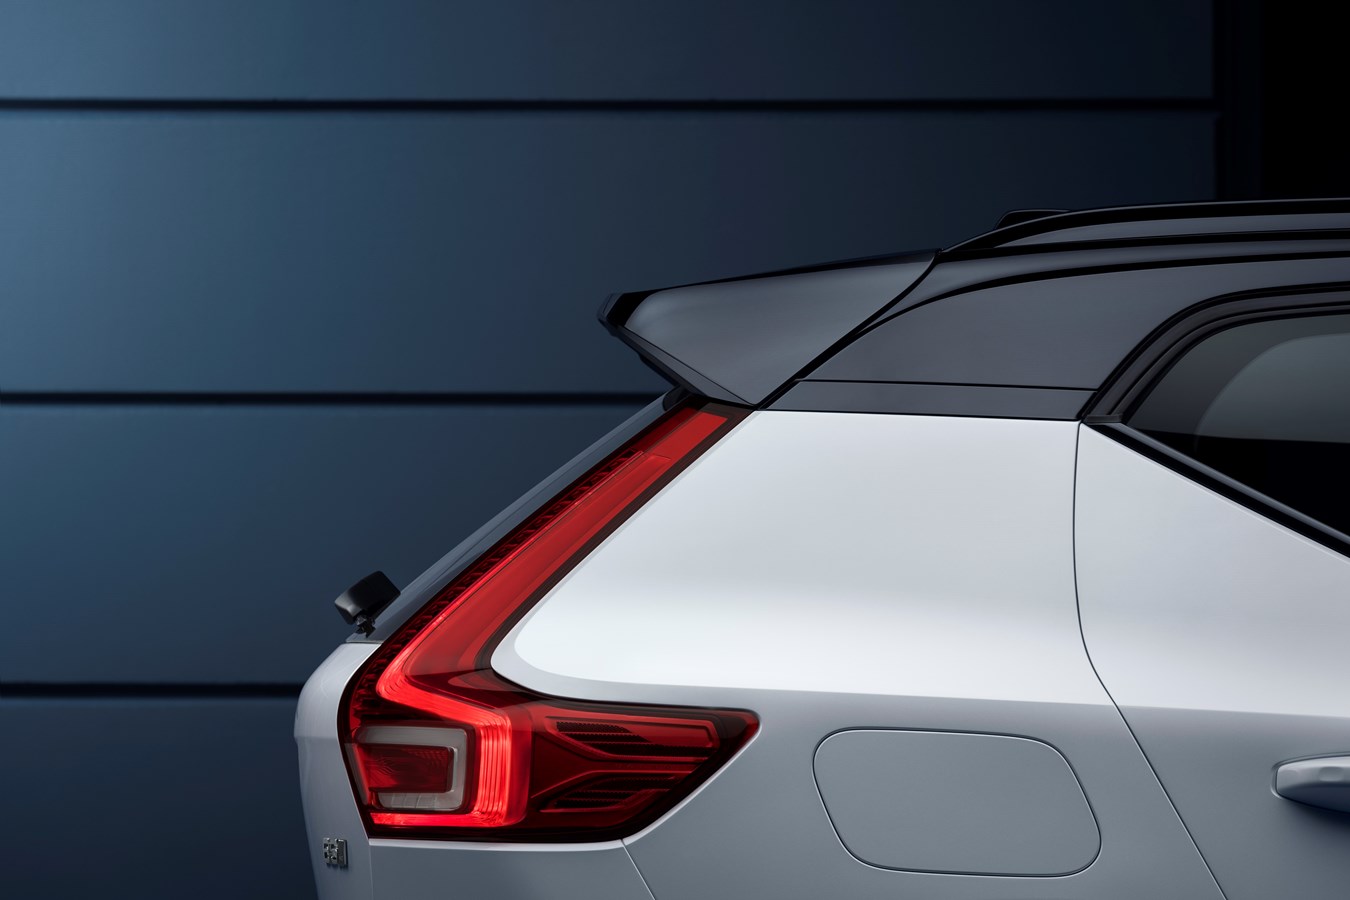 XC40 R-Design expression, in Crystal White Pearl